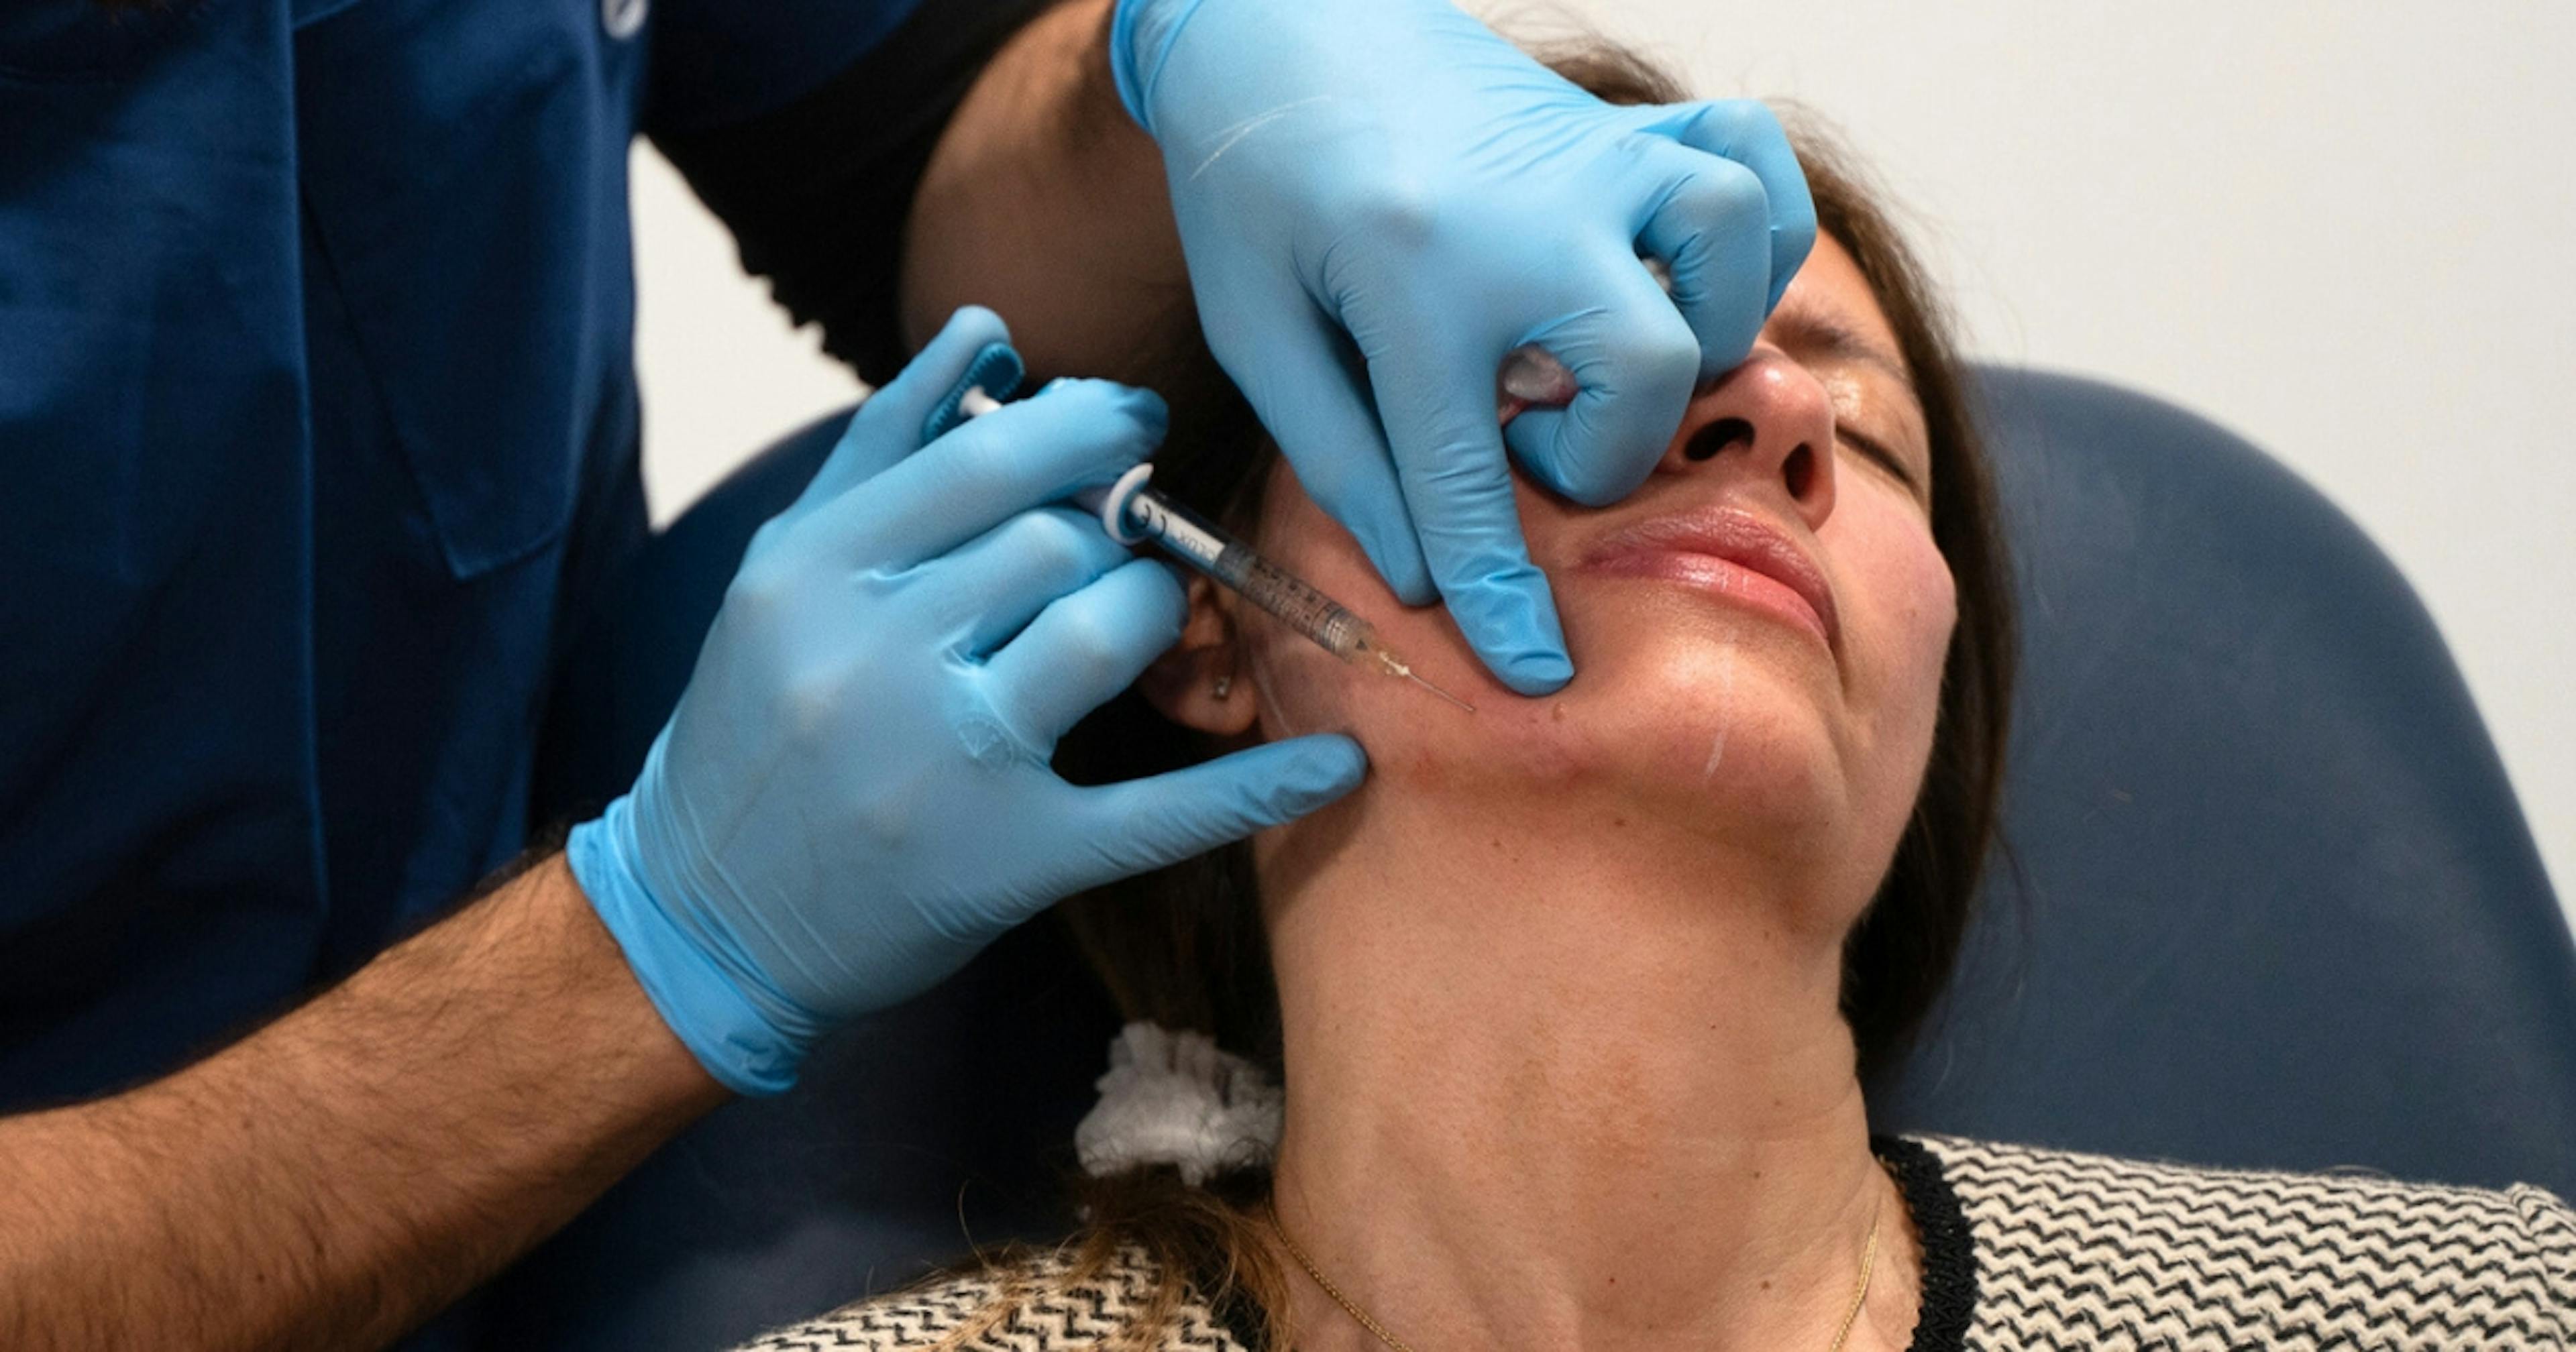 Lower face filler jawline contouring and chin filler training at Harley Academy